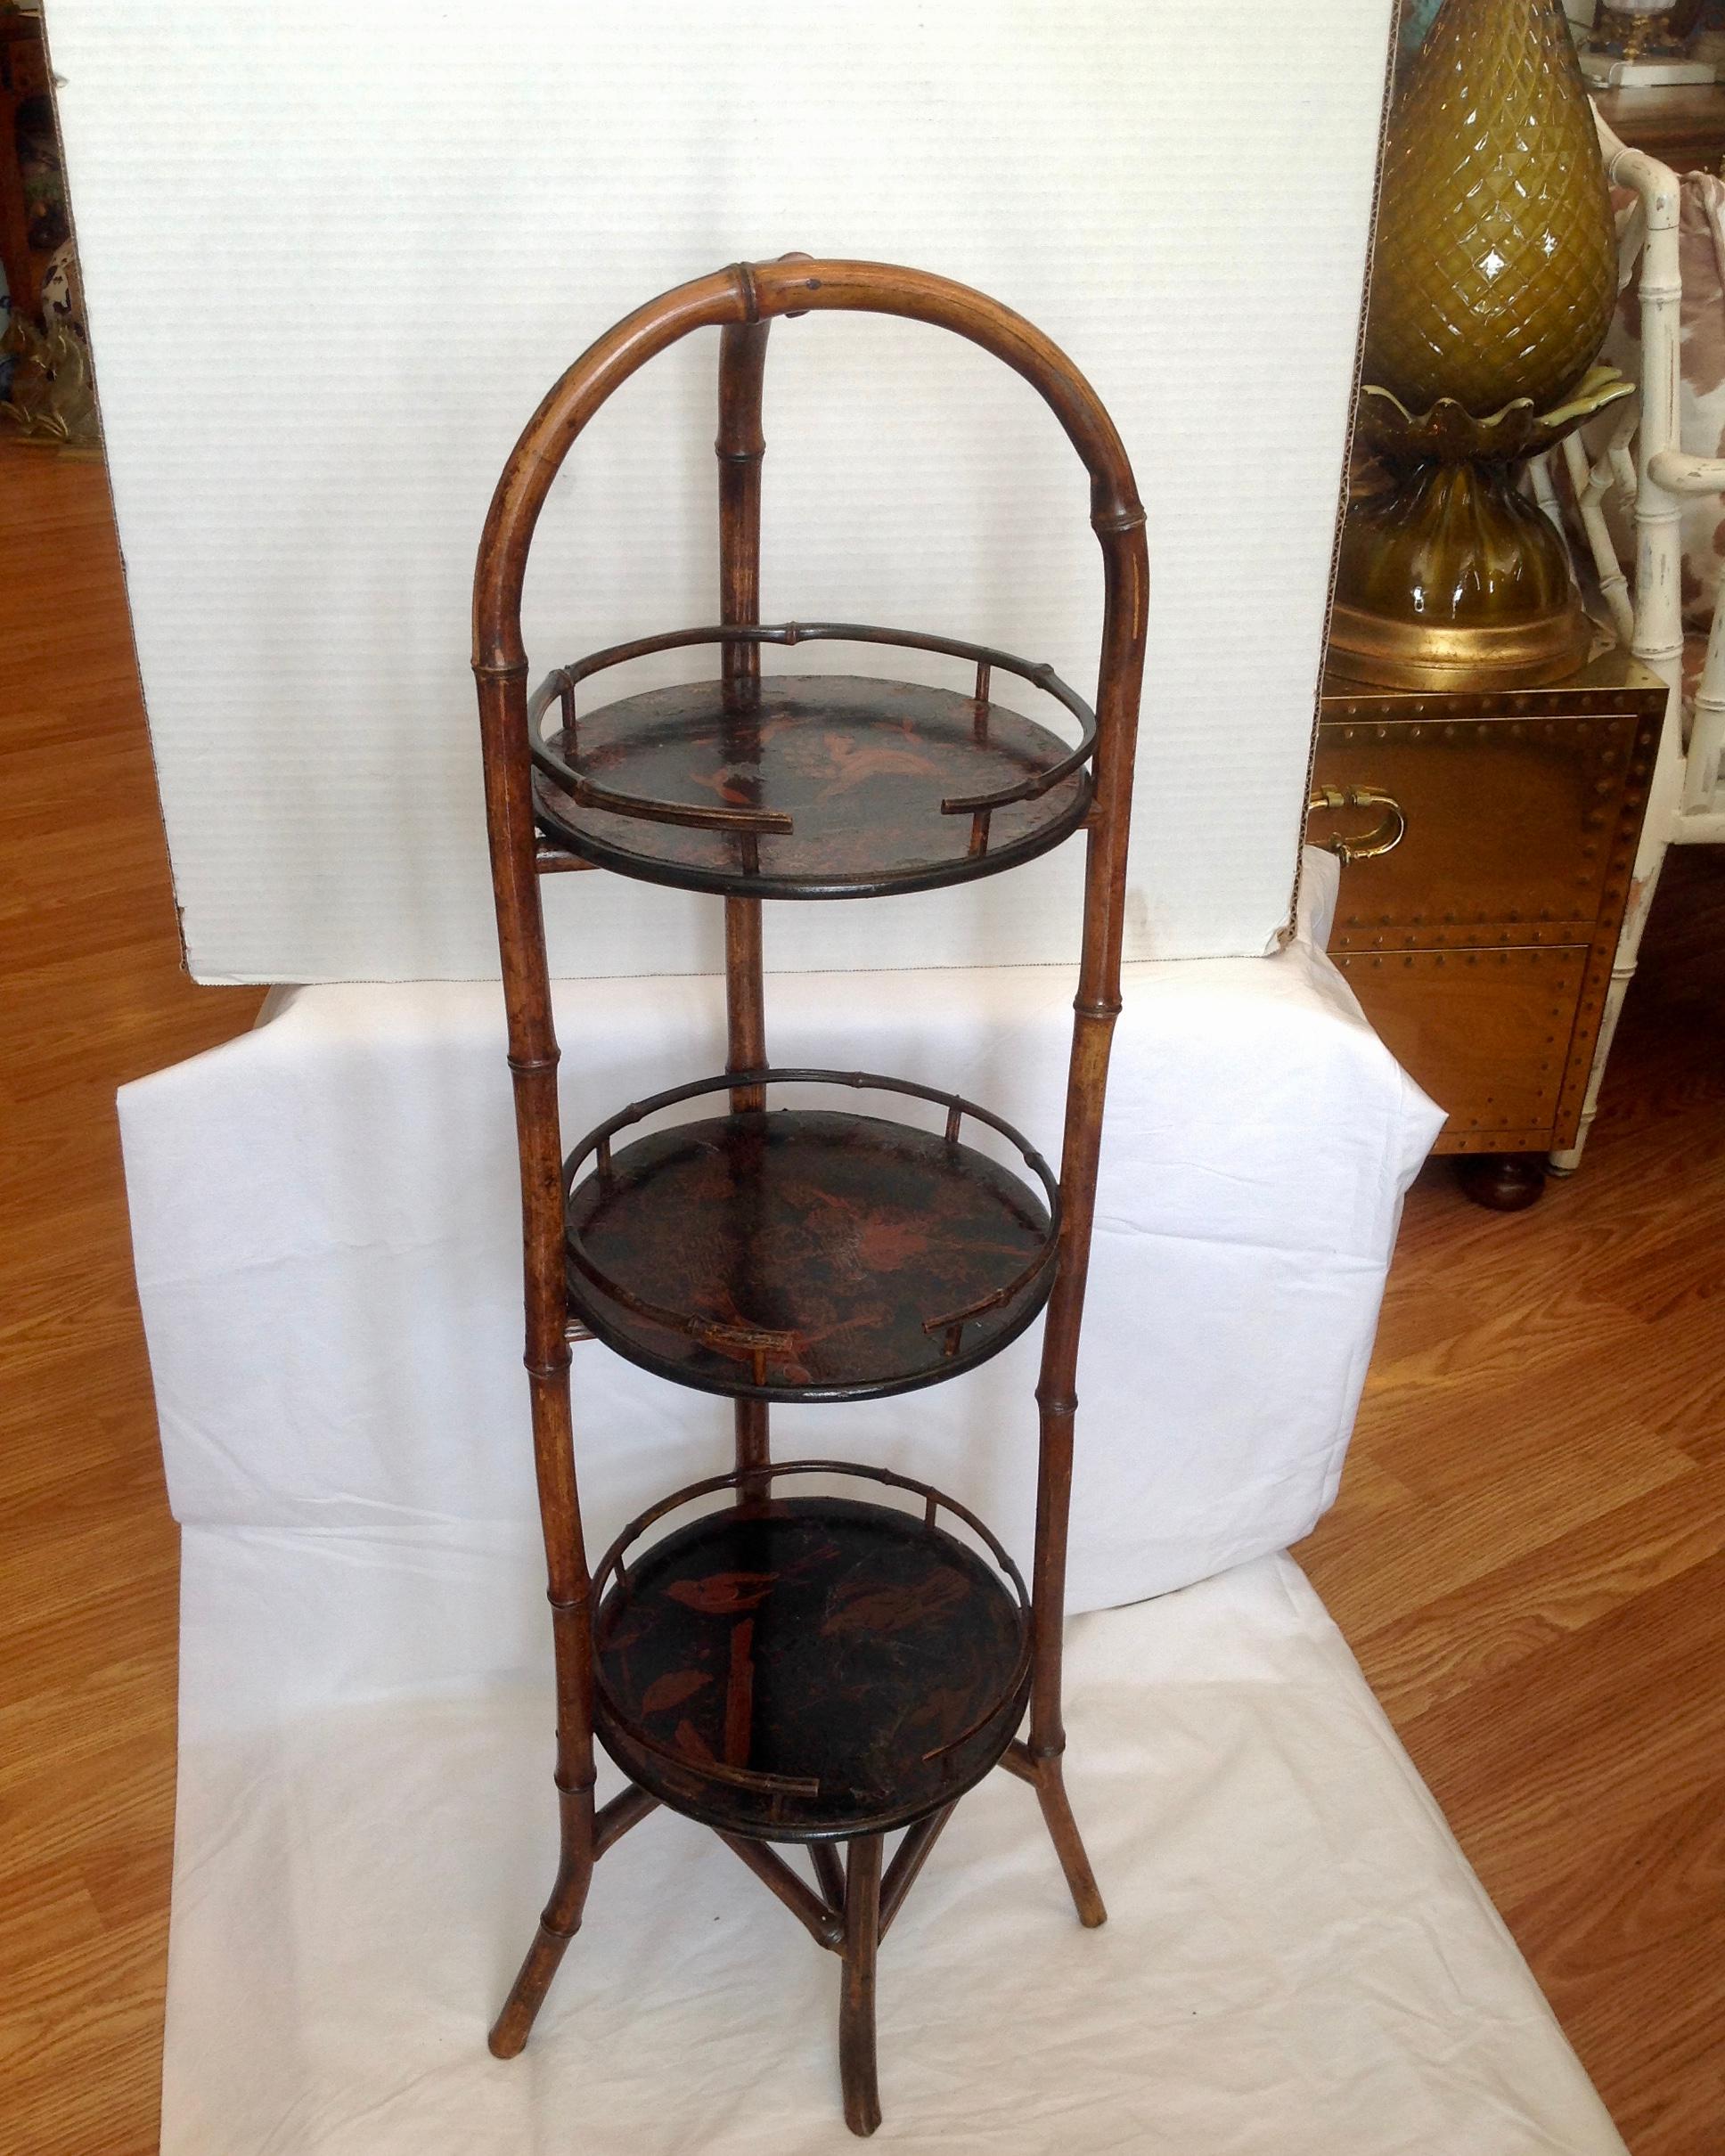 A desirable petite étagère or chair side stand - nicely detailed and appointed.